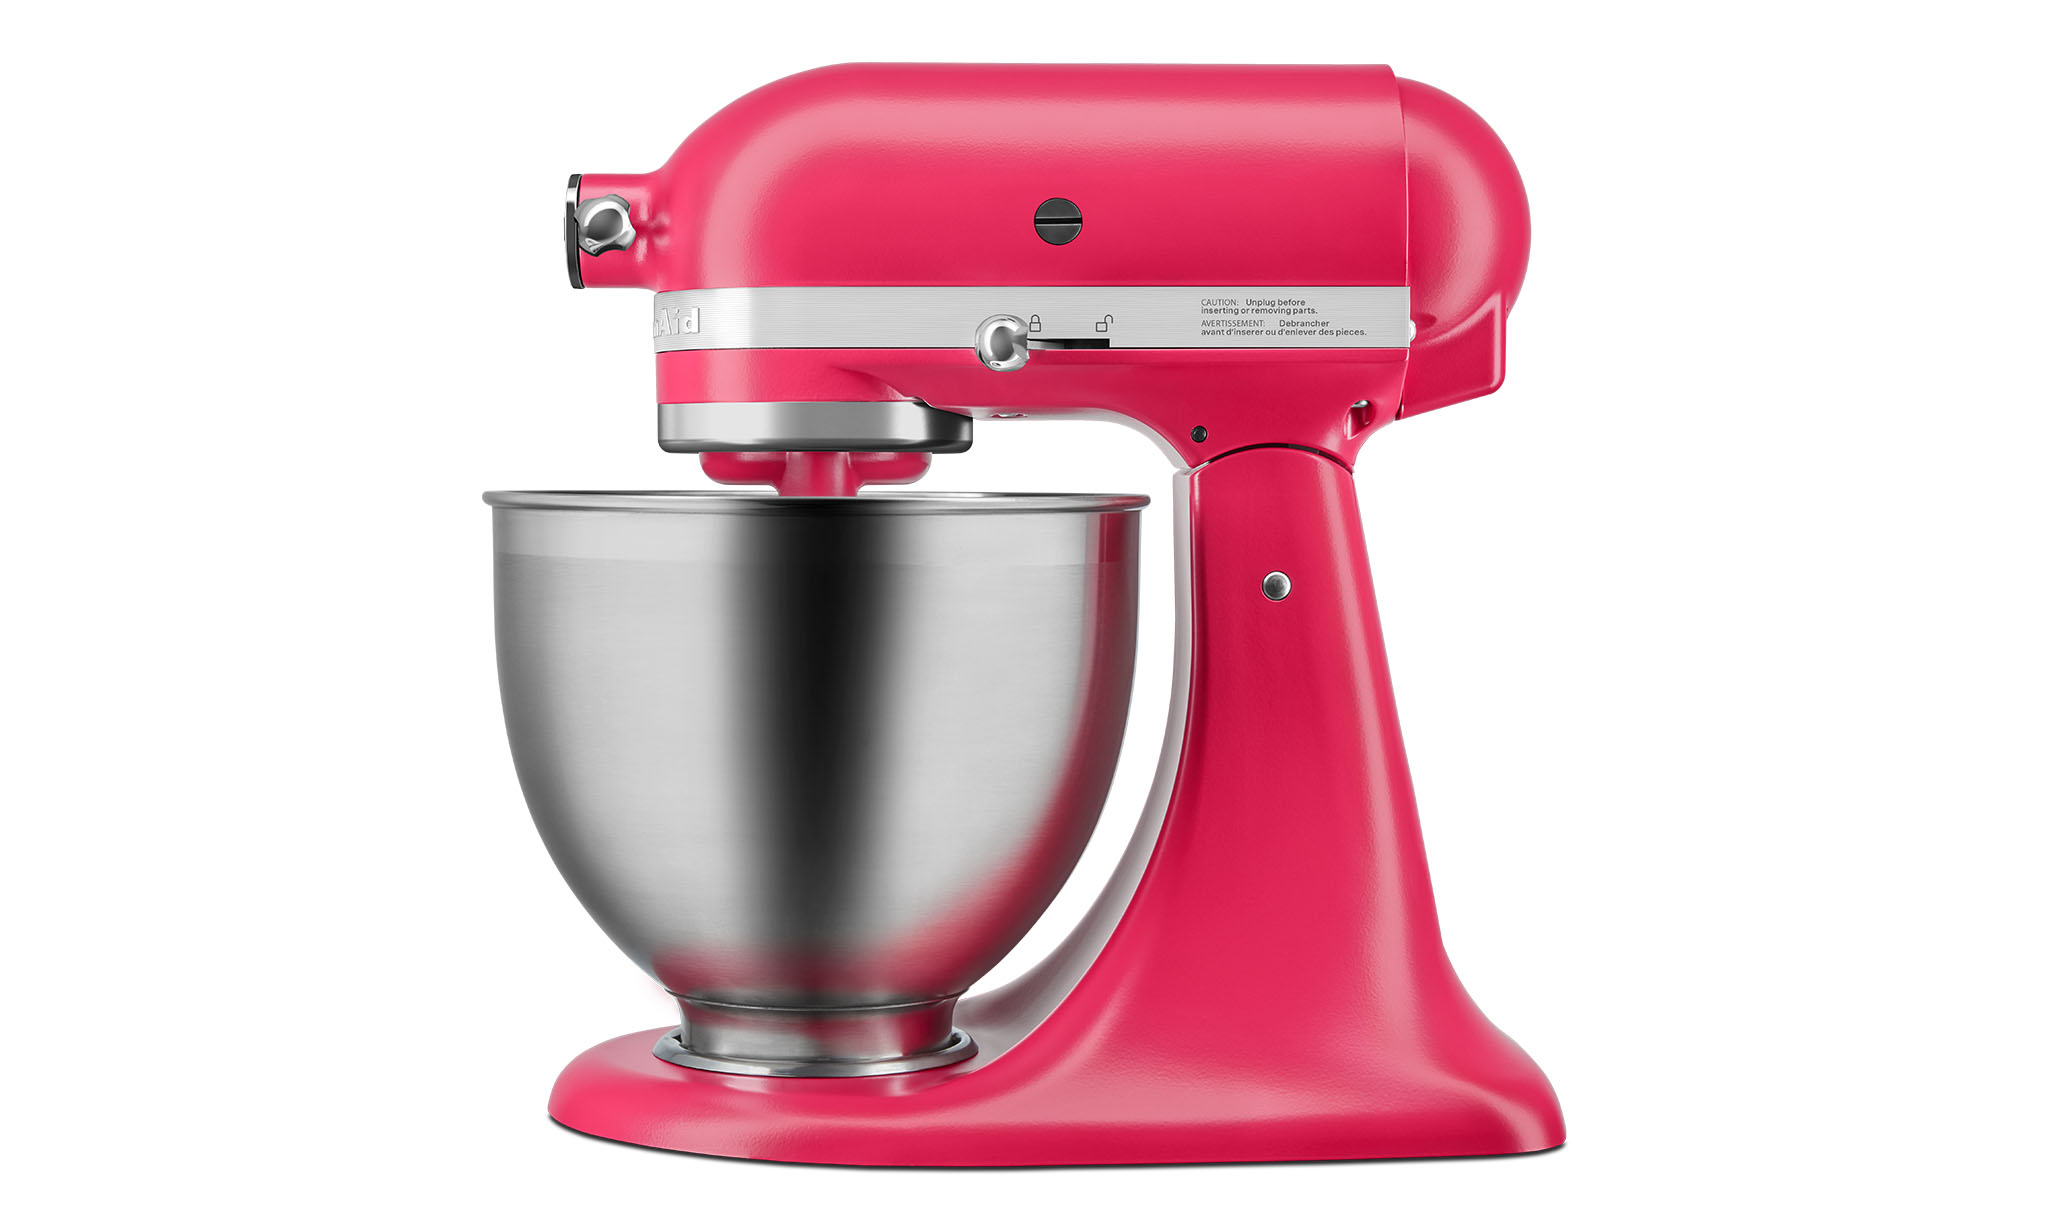 KitchenAid Just Announced Hibiscus Its 2023 Color of the Year